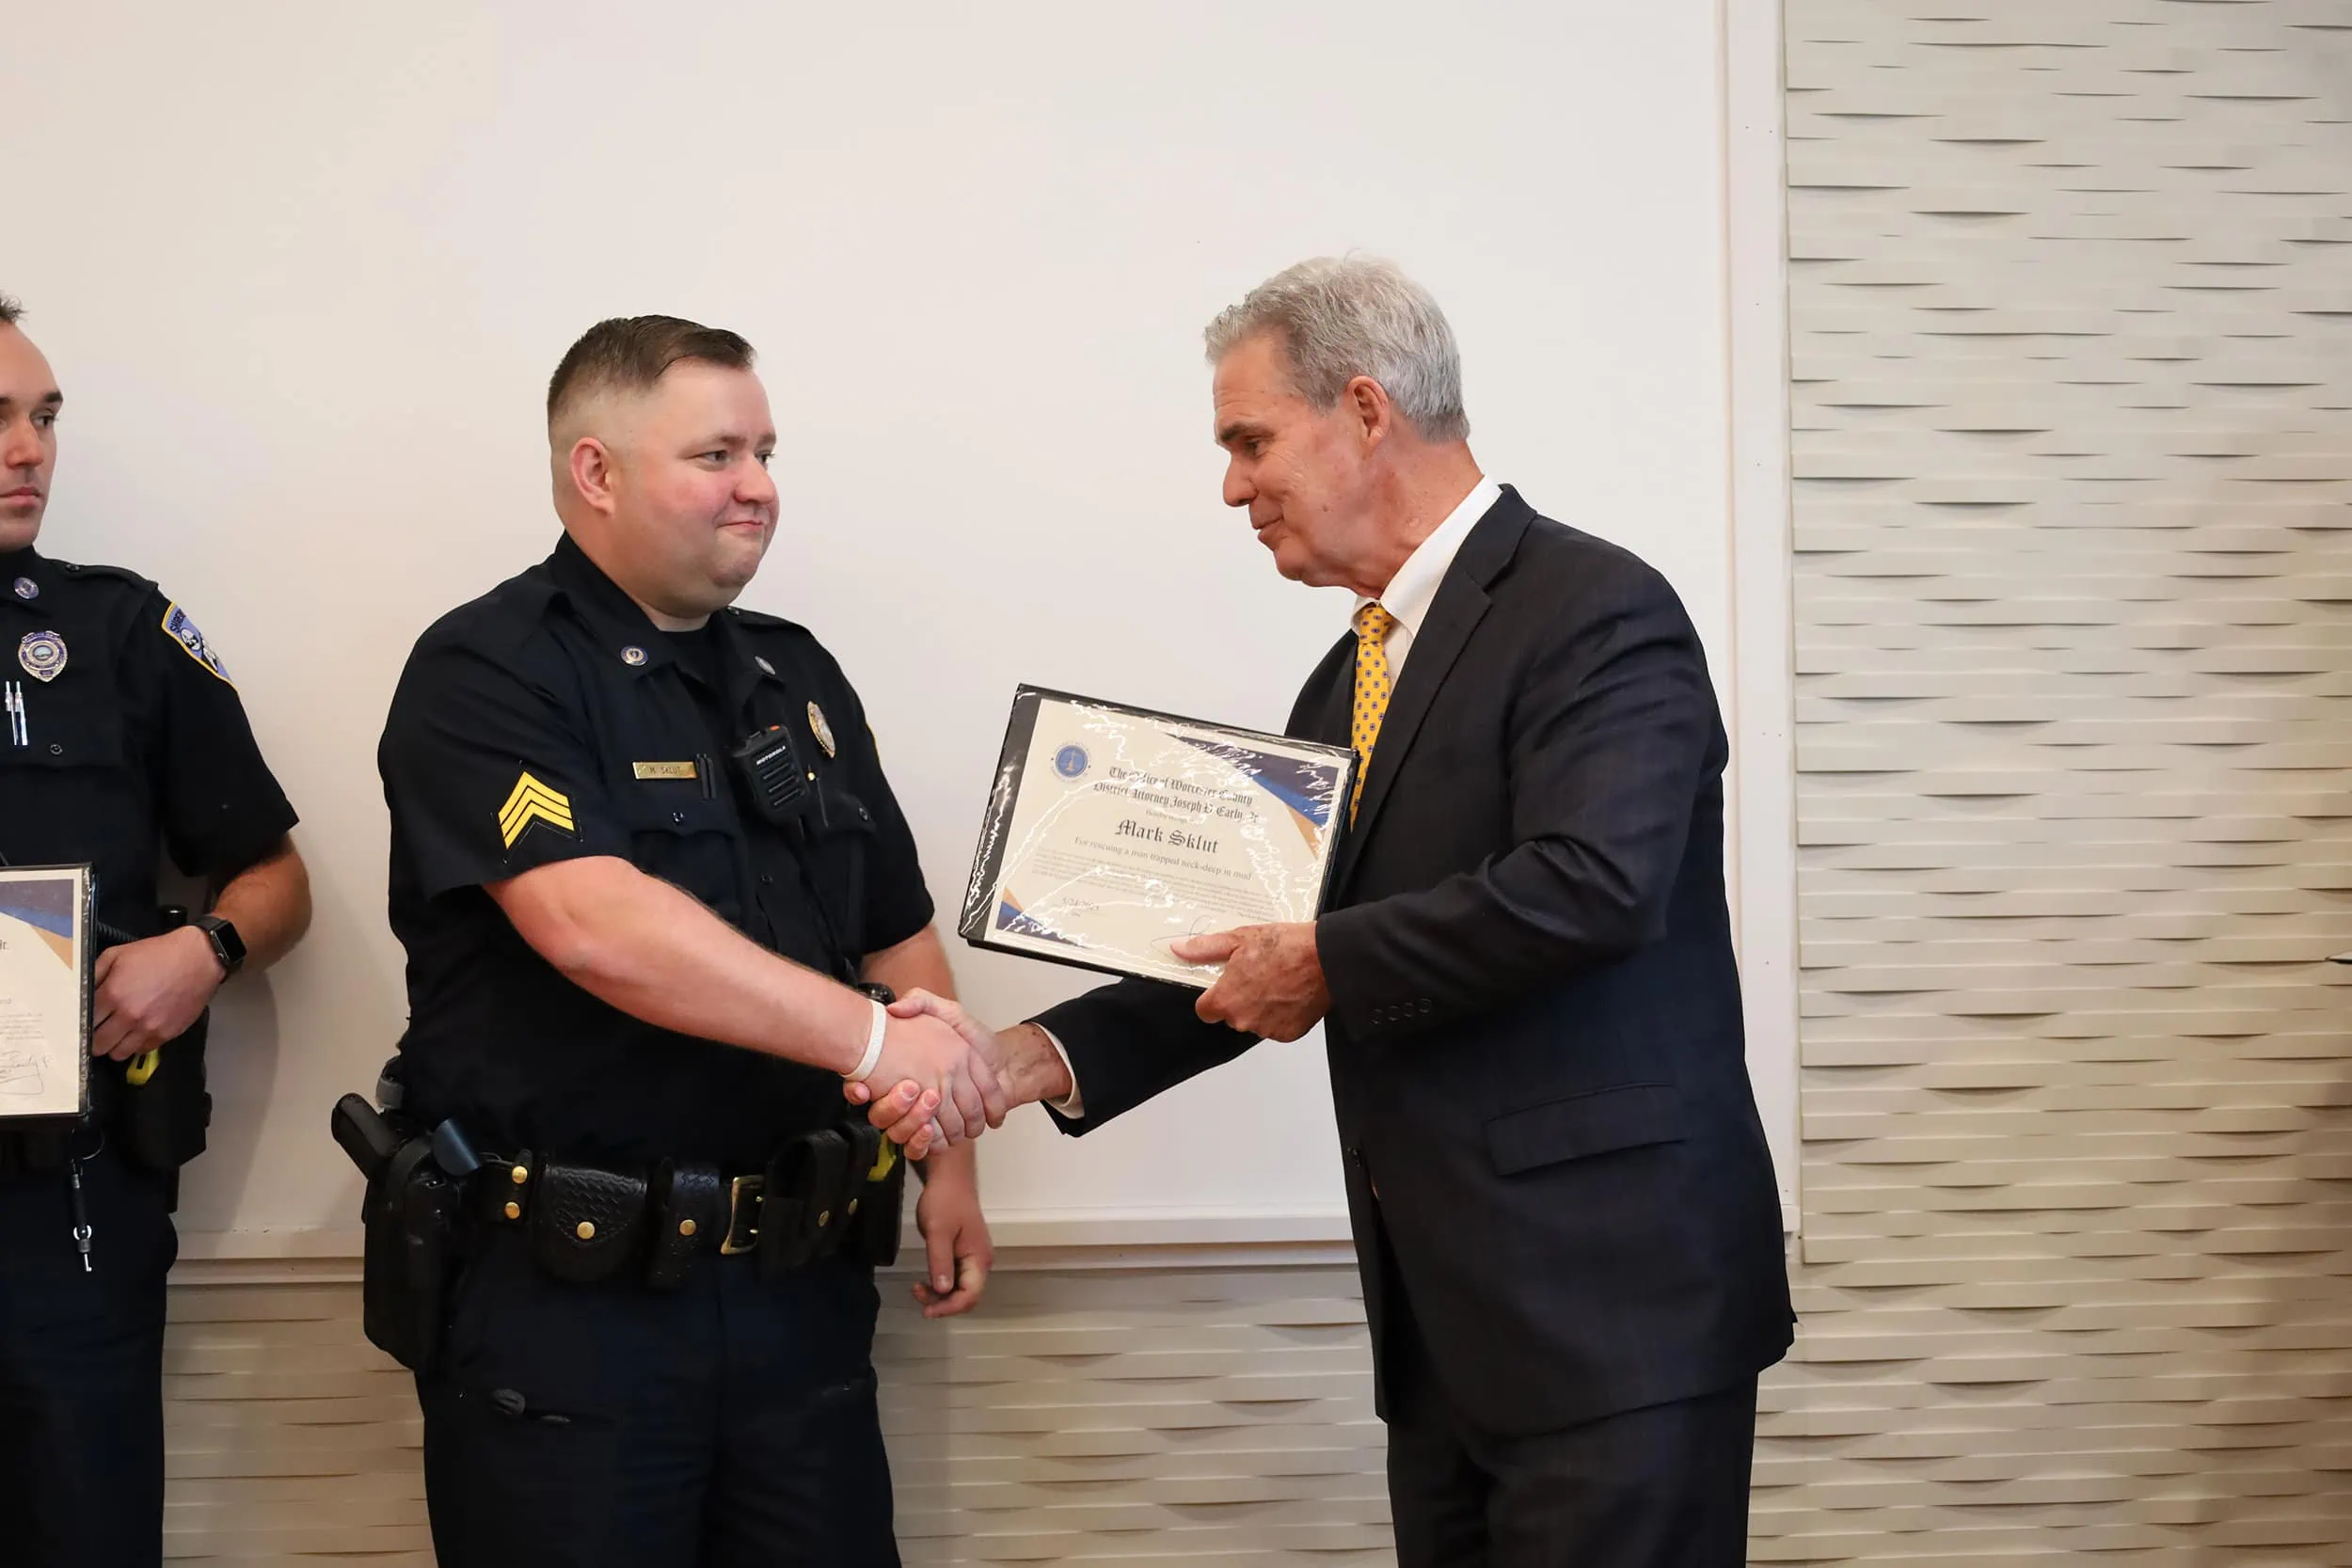 District attorney honors Shrewsbury police for life-saving rescue